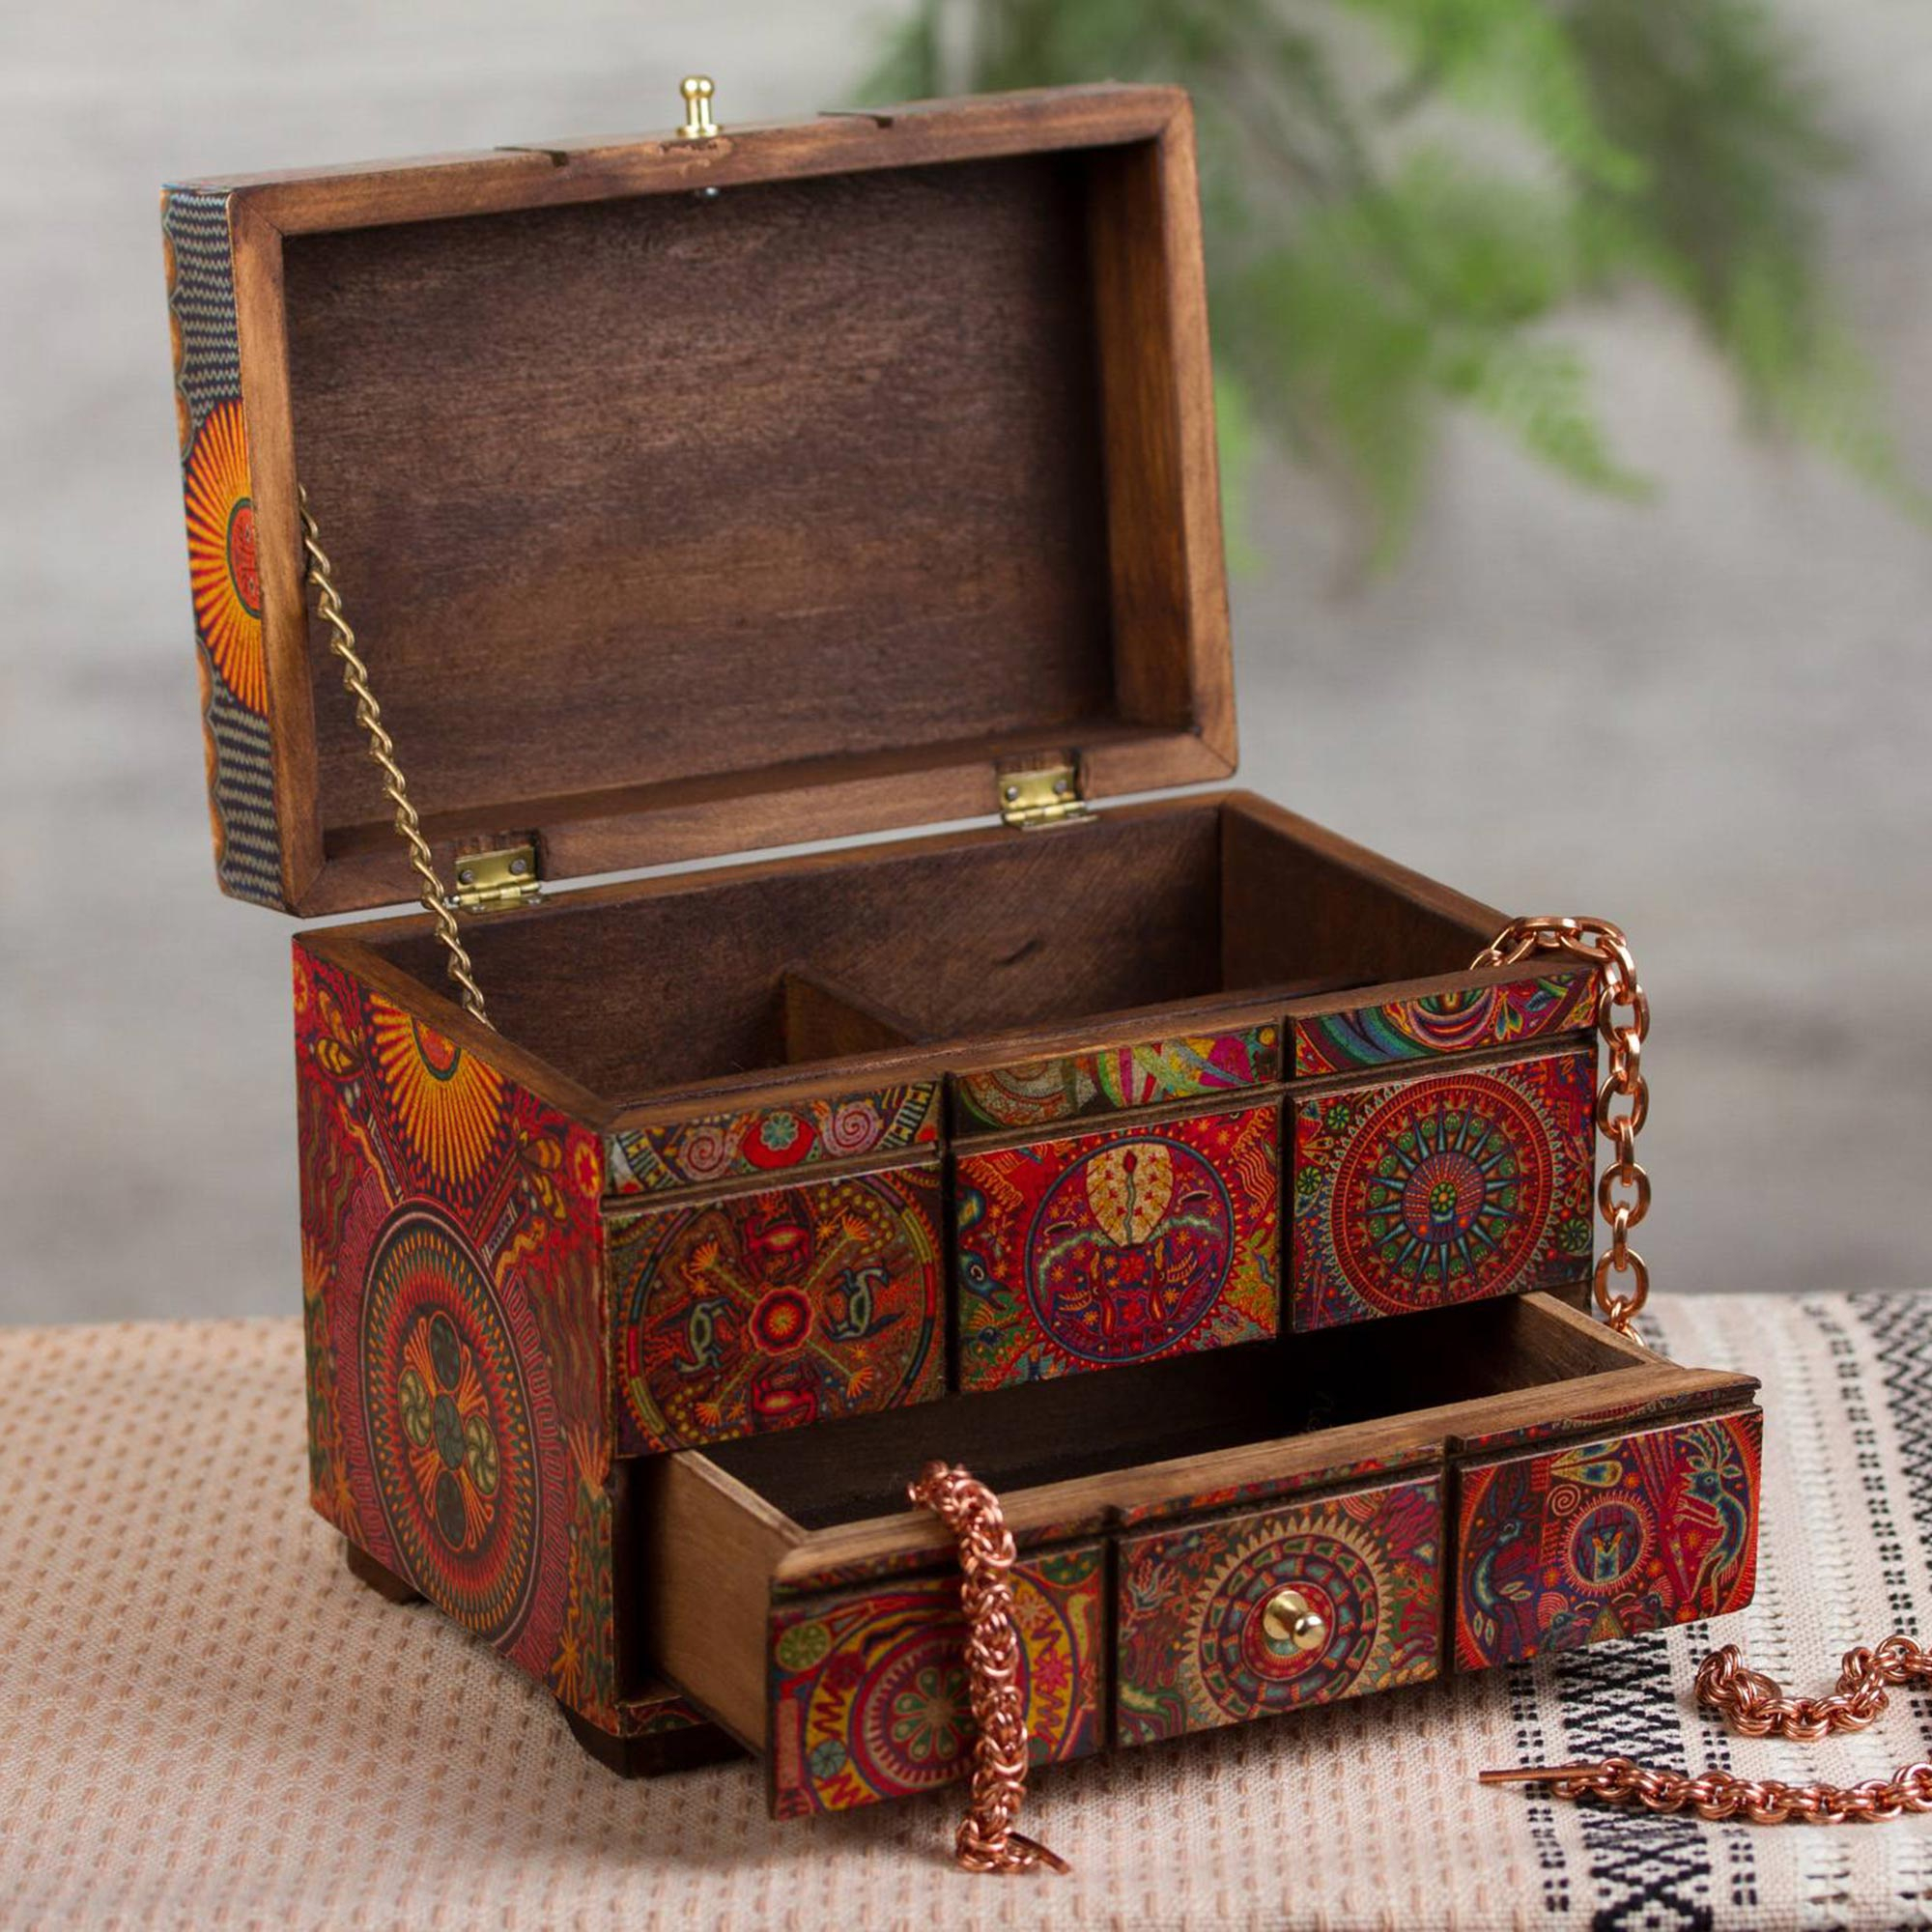 A BEAUTIFUL INDIAN HEARTS THEME HAND MADE JEWELLERY /& TRINKET BOX LOVELY GIFT.